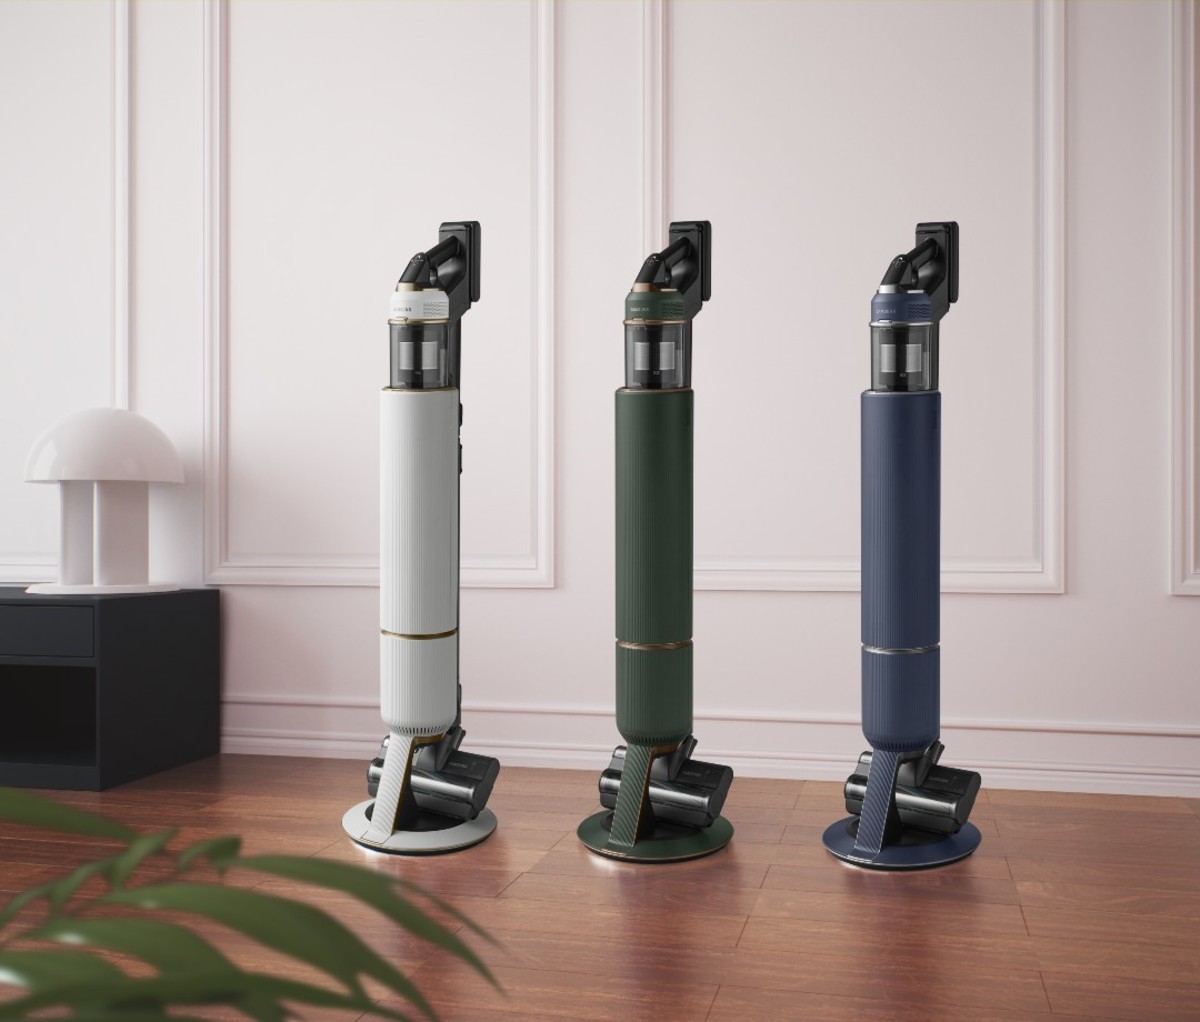 White, forest green, and navy blue vacuums